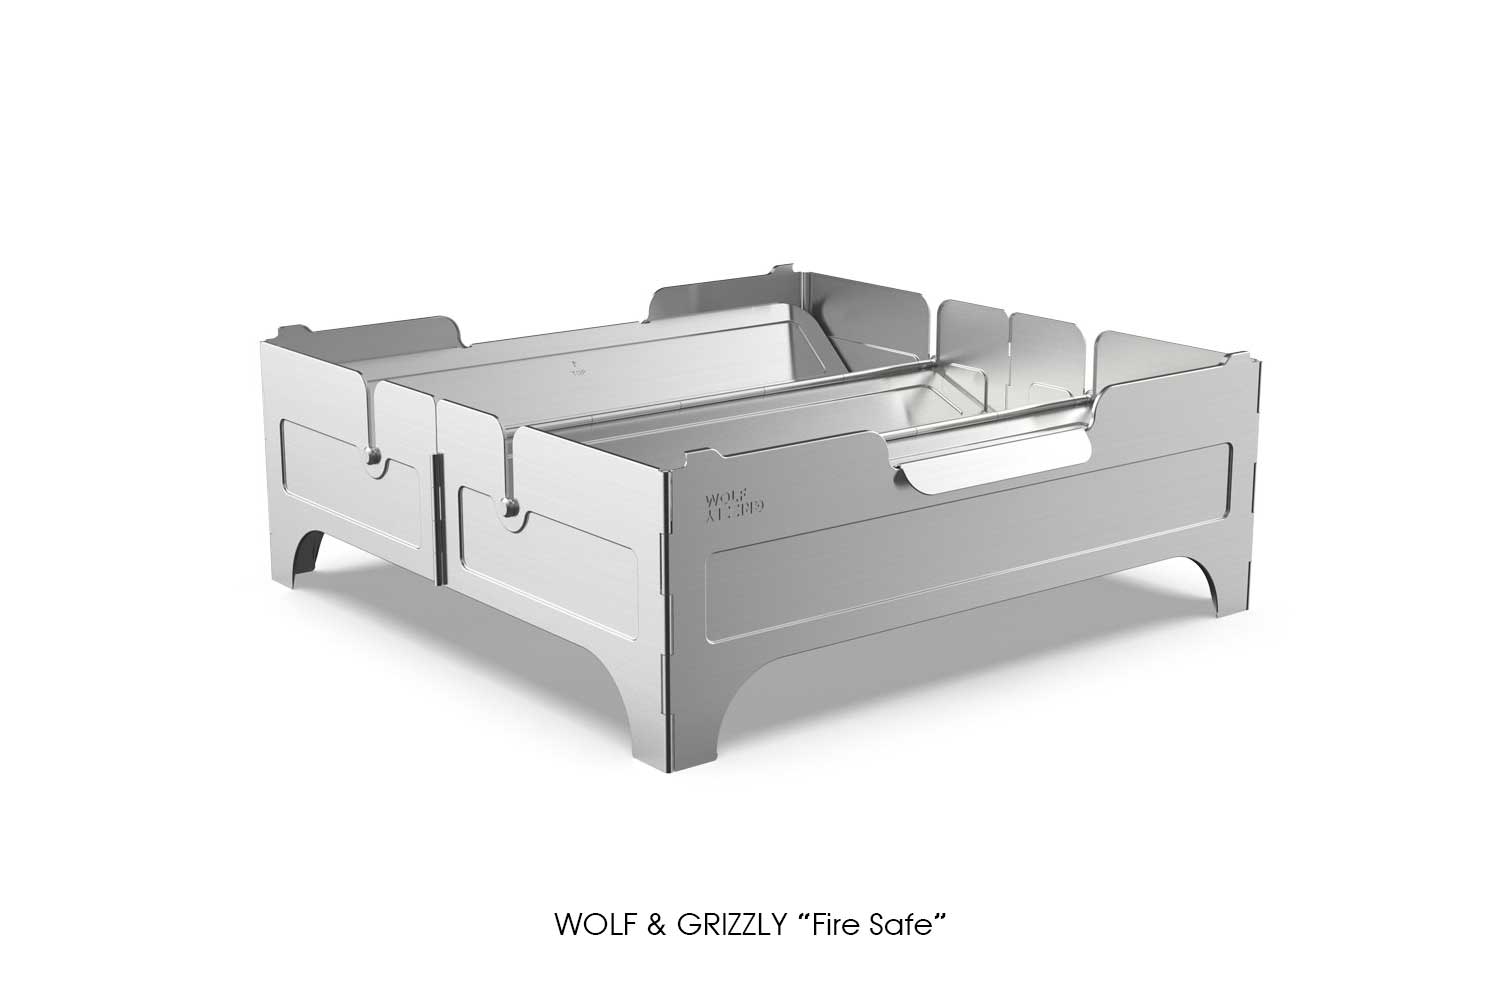 WOLF & GRIZZLY "Fire Safe"